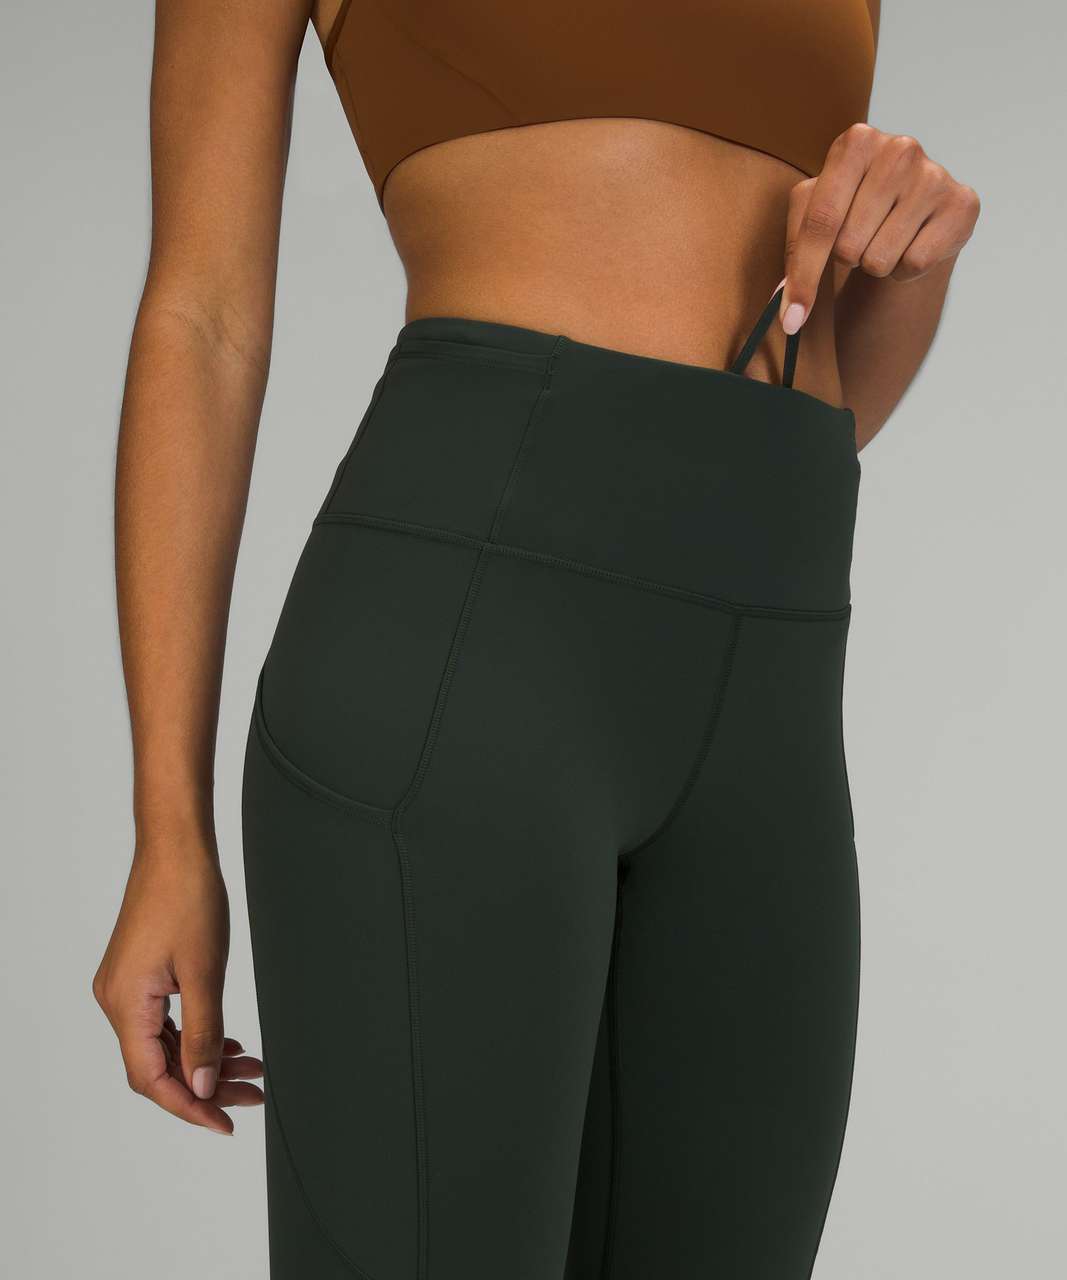 Lululemon Fast and Free High-Rise Tight 28" *Brushed Nulux - Rainforest Green